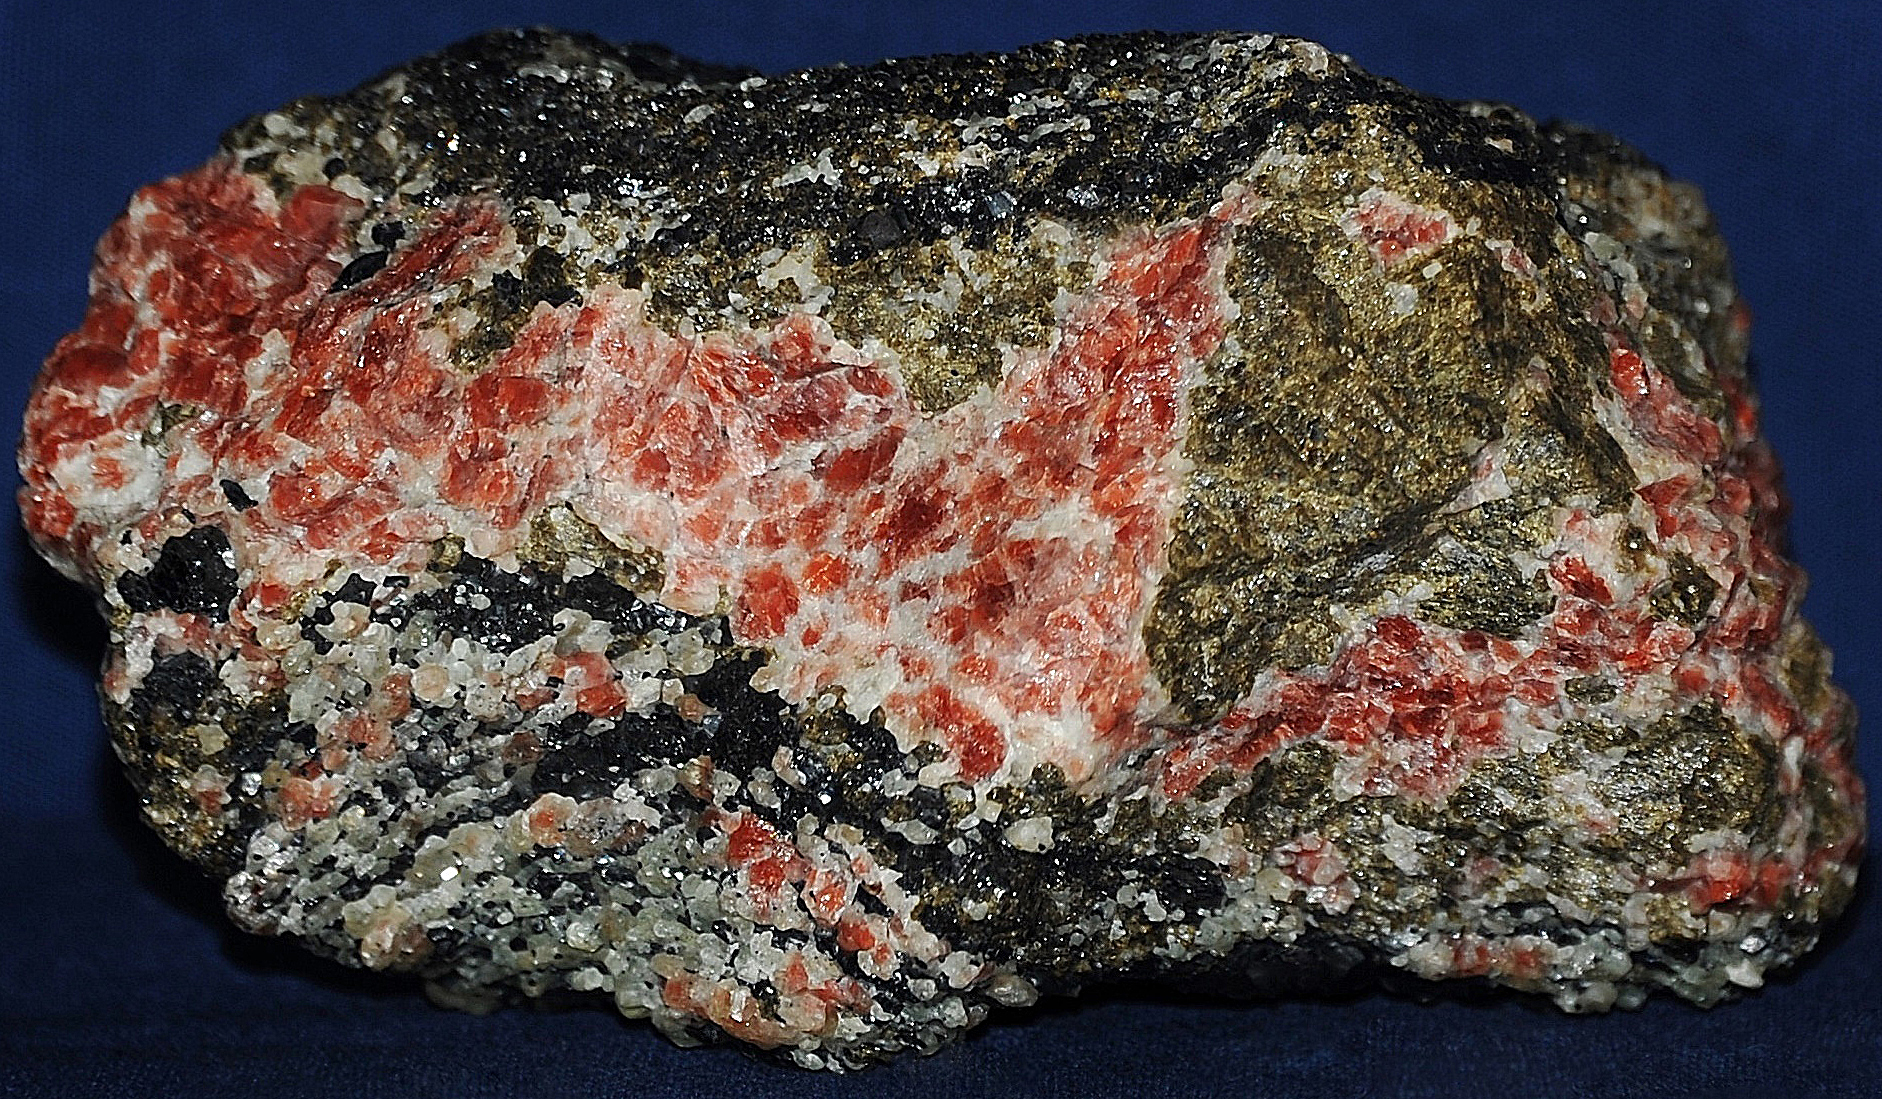 Red willemite, green andradite garnet and franklinite from Franklin, NJ